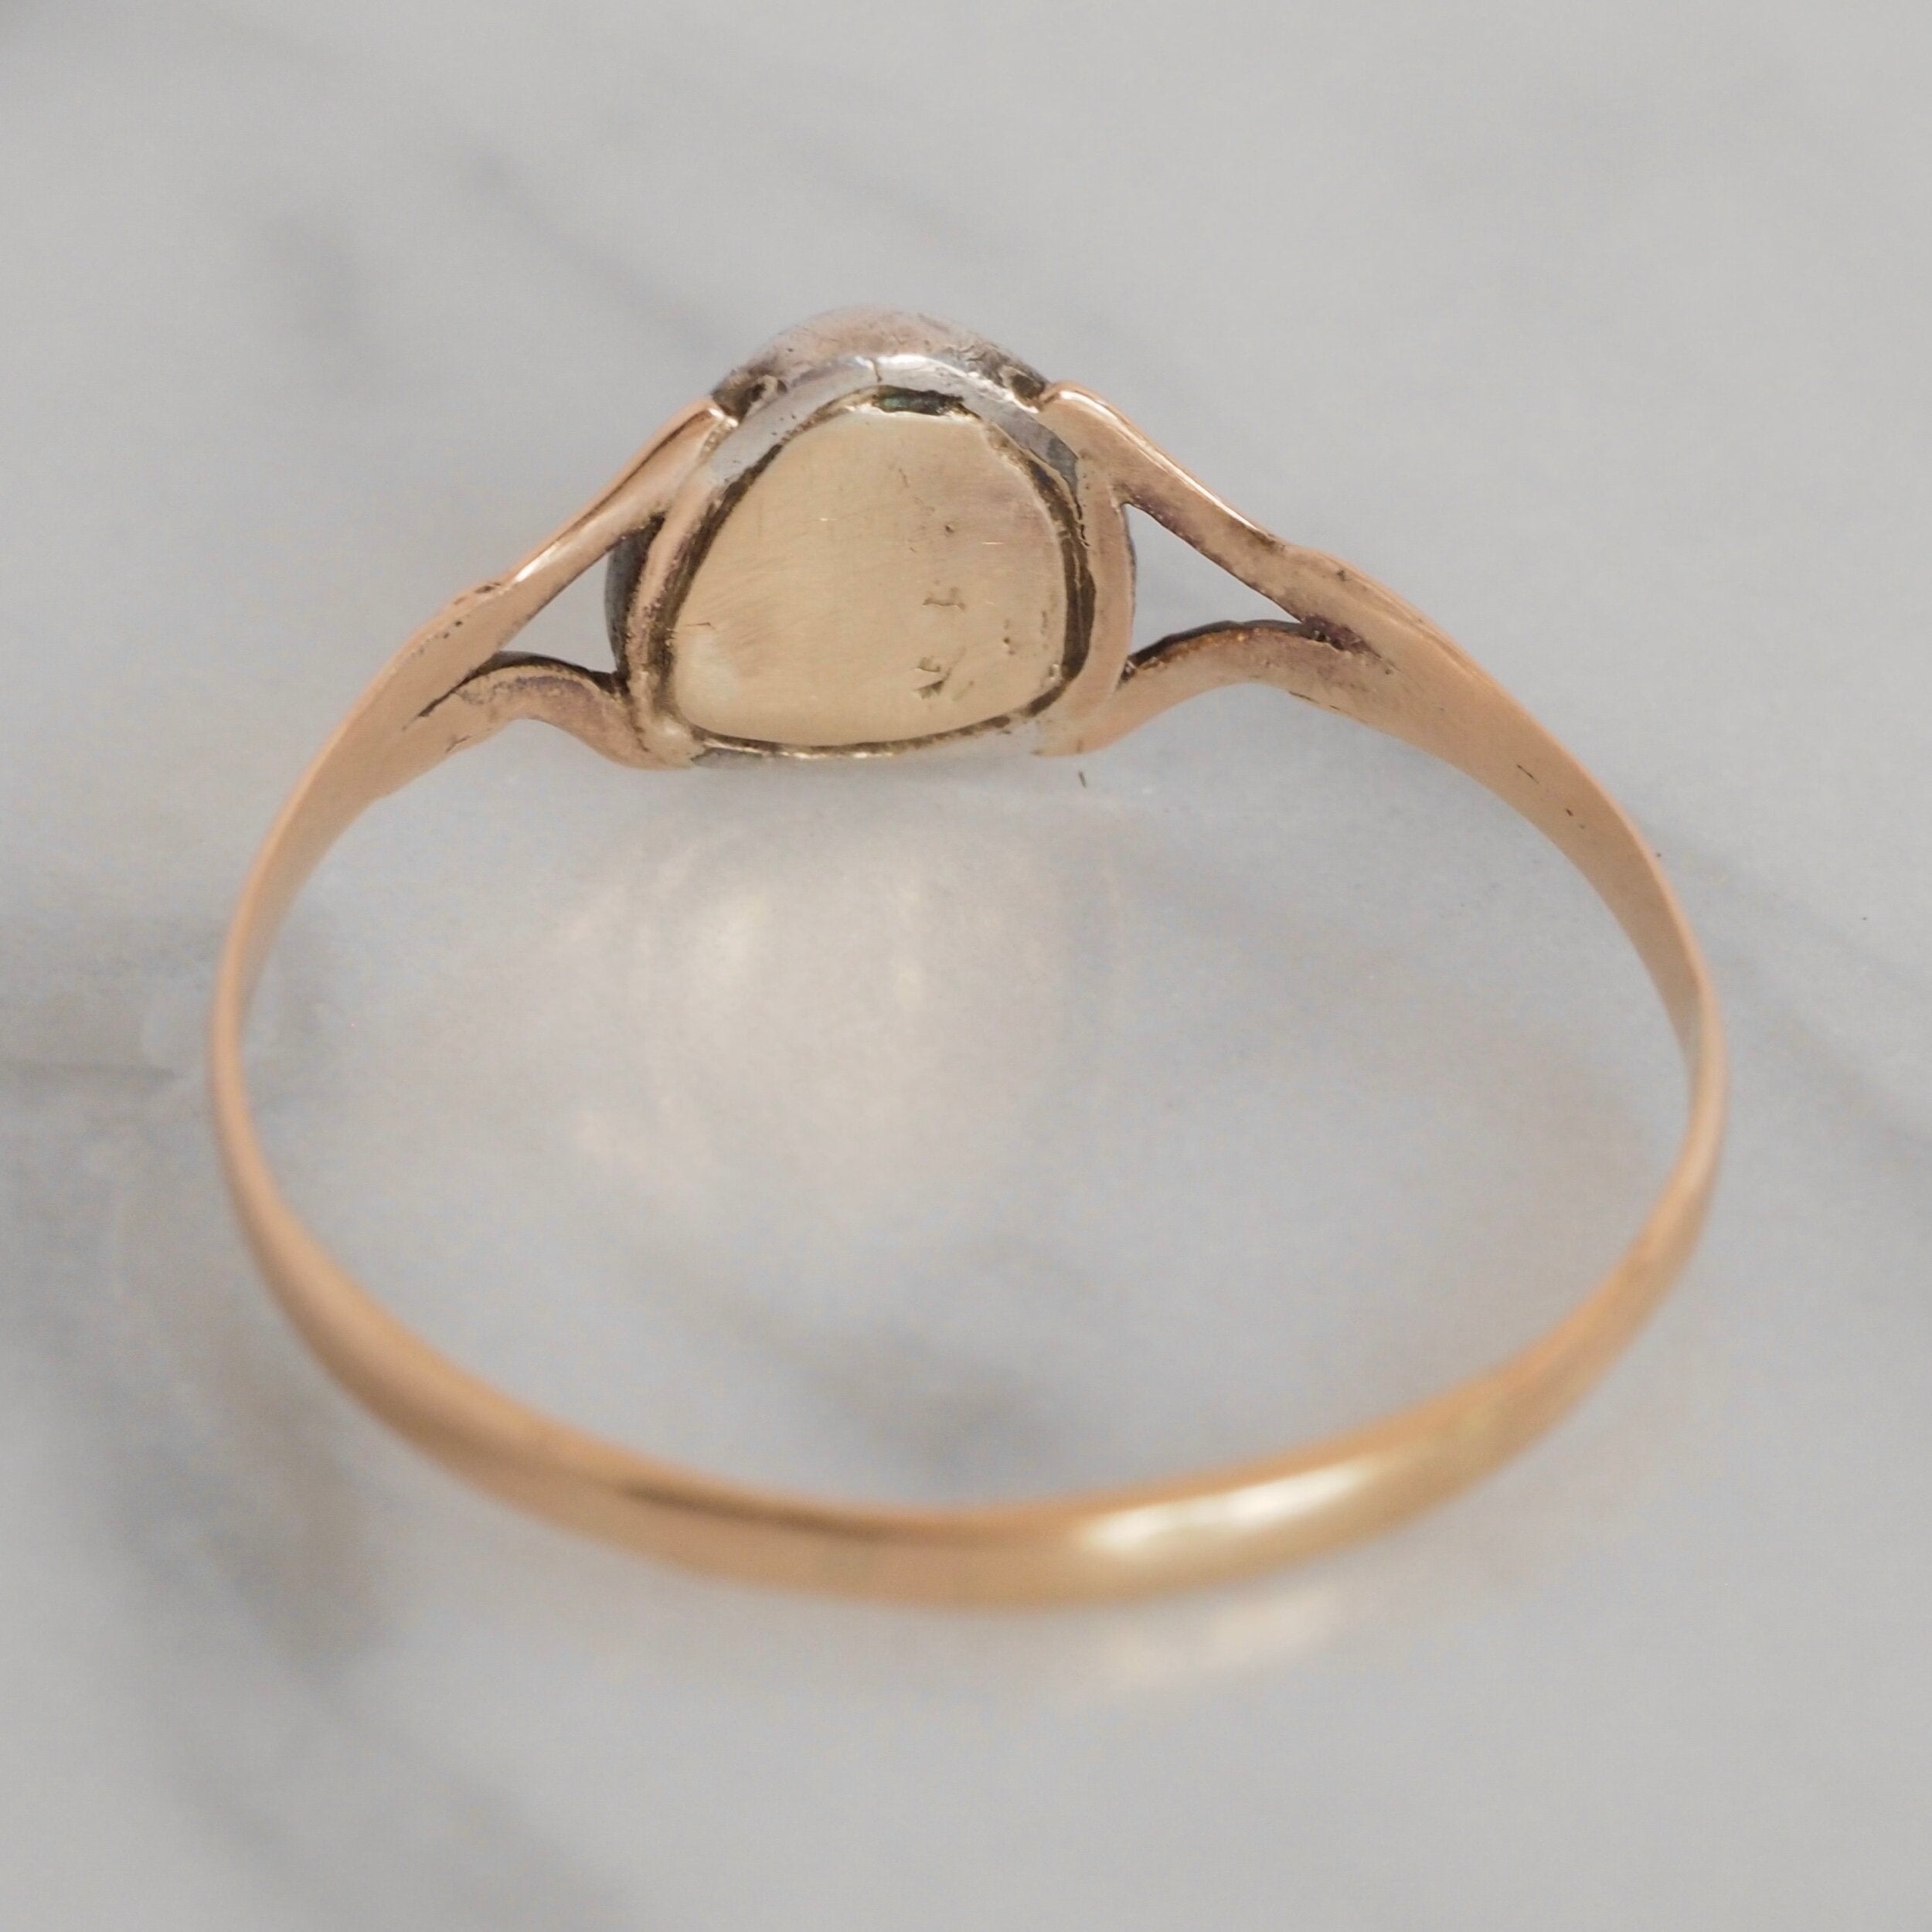 Antique Georgian 14k Gold and Silver Heart Shaped Rose Cut Diamond Ring